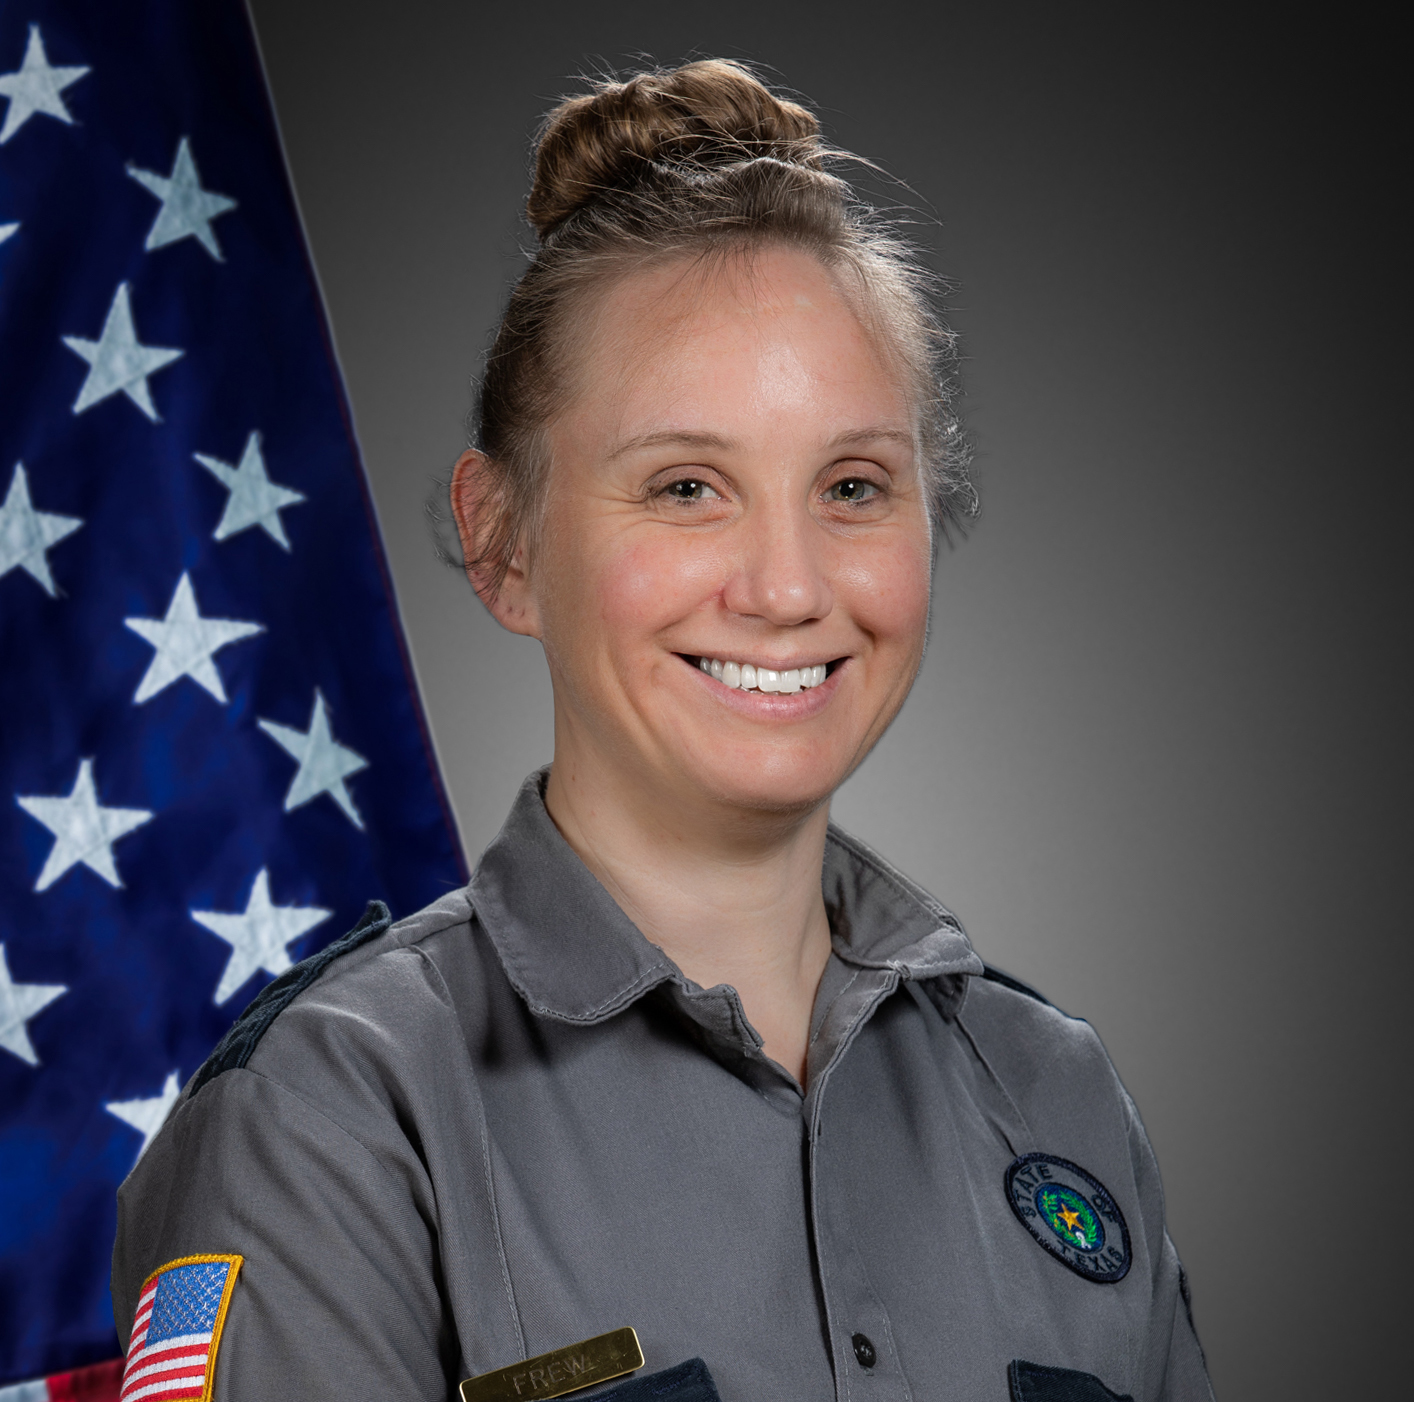 jessica frew in her correctional officer uniform